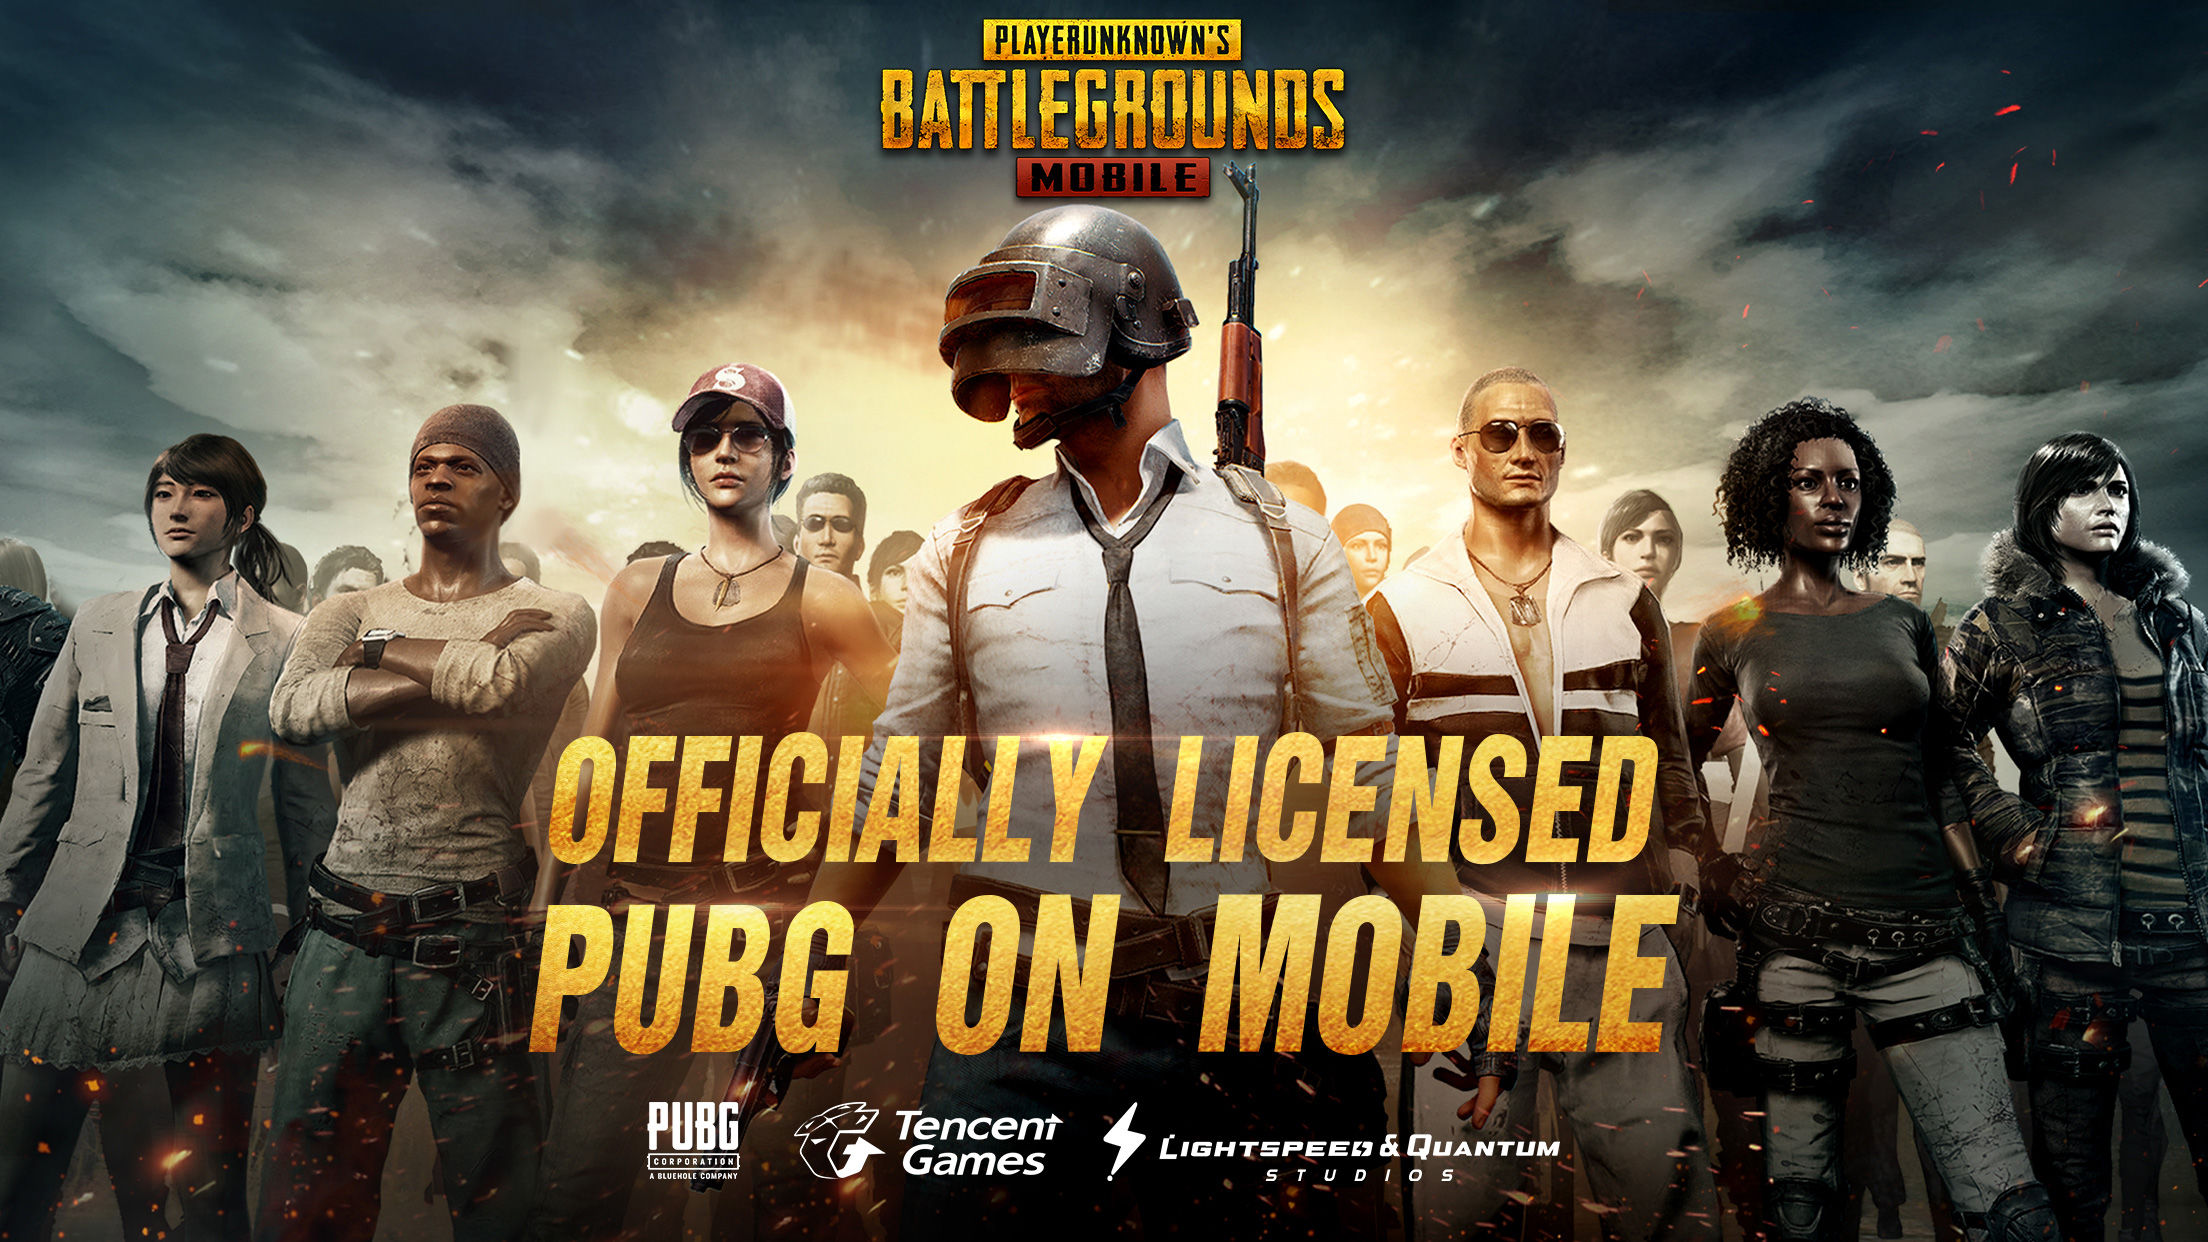 'PUBG Mobile' Is Already #1 in More Than 100 Countries Just Days After Releasing Worldwide